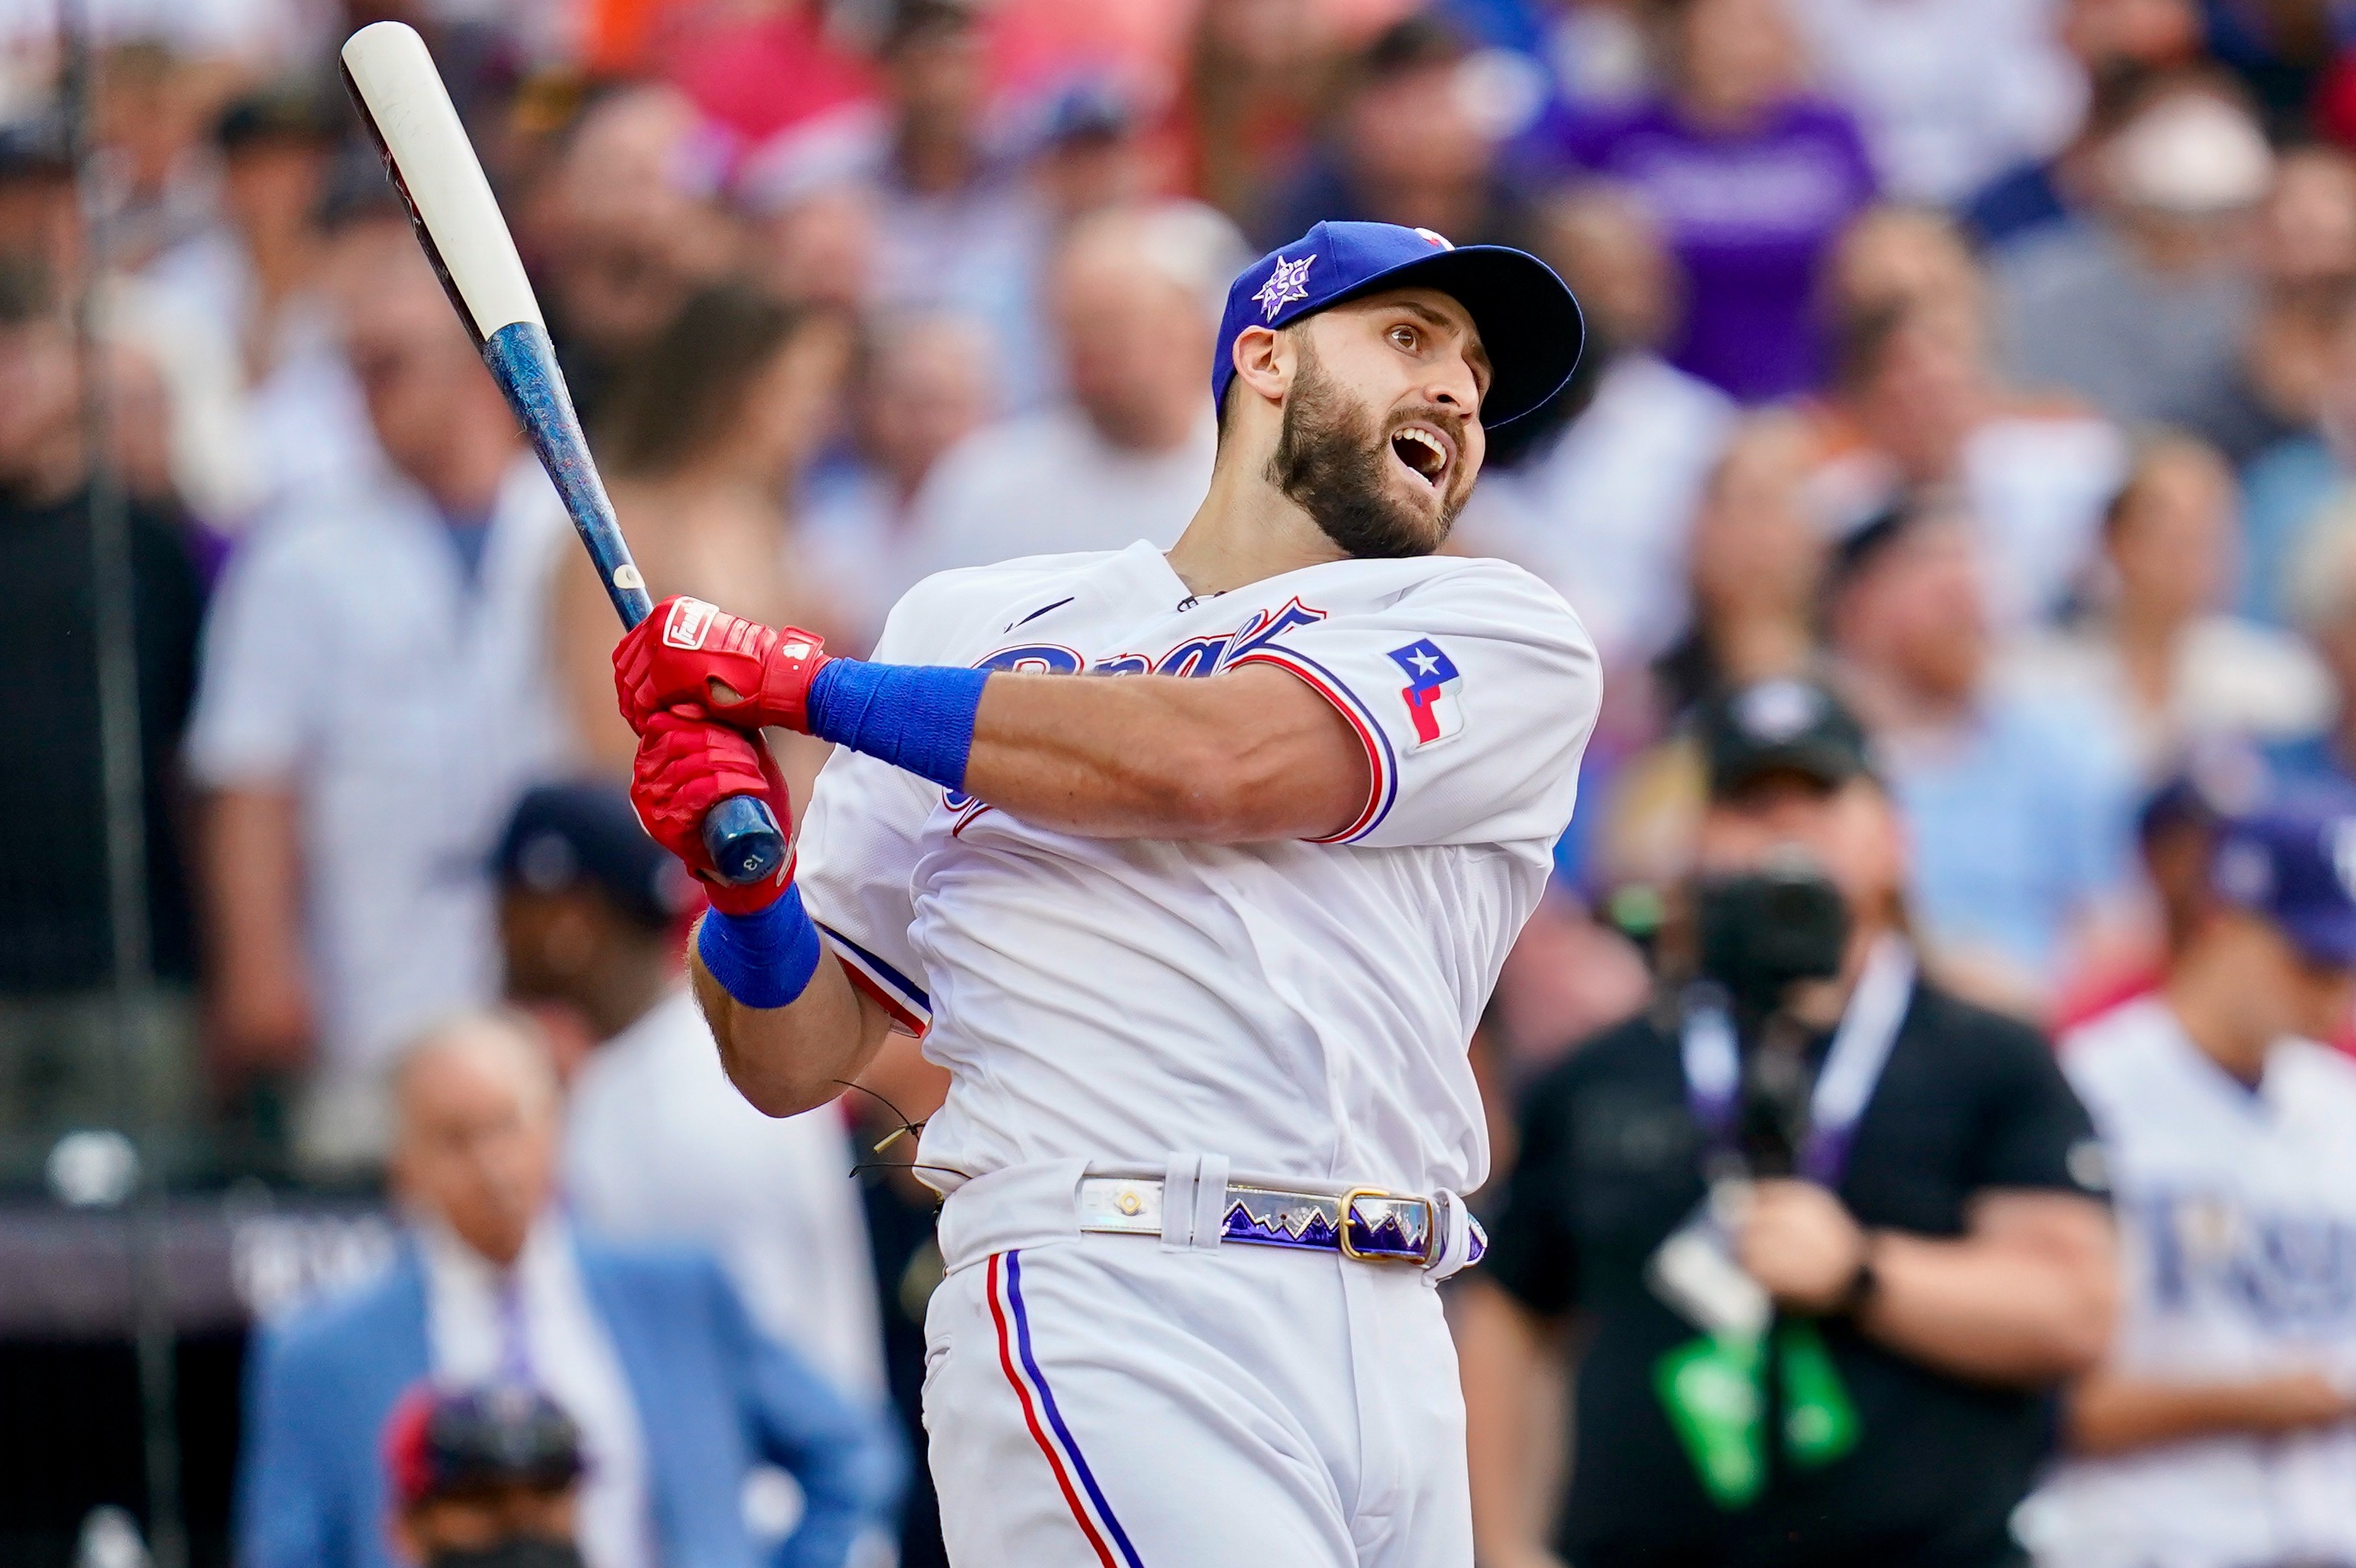 Joey Gallo] Thank you, Texas. It's been an honor to wear this